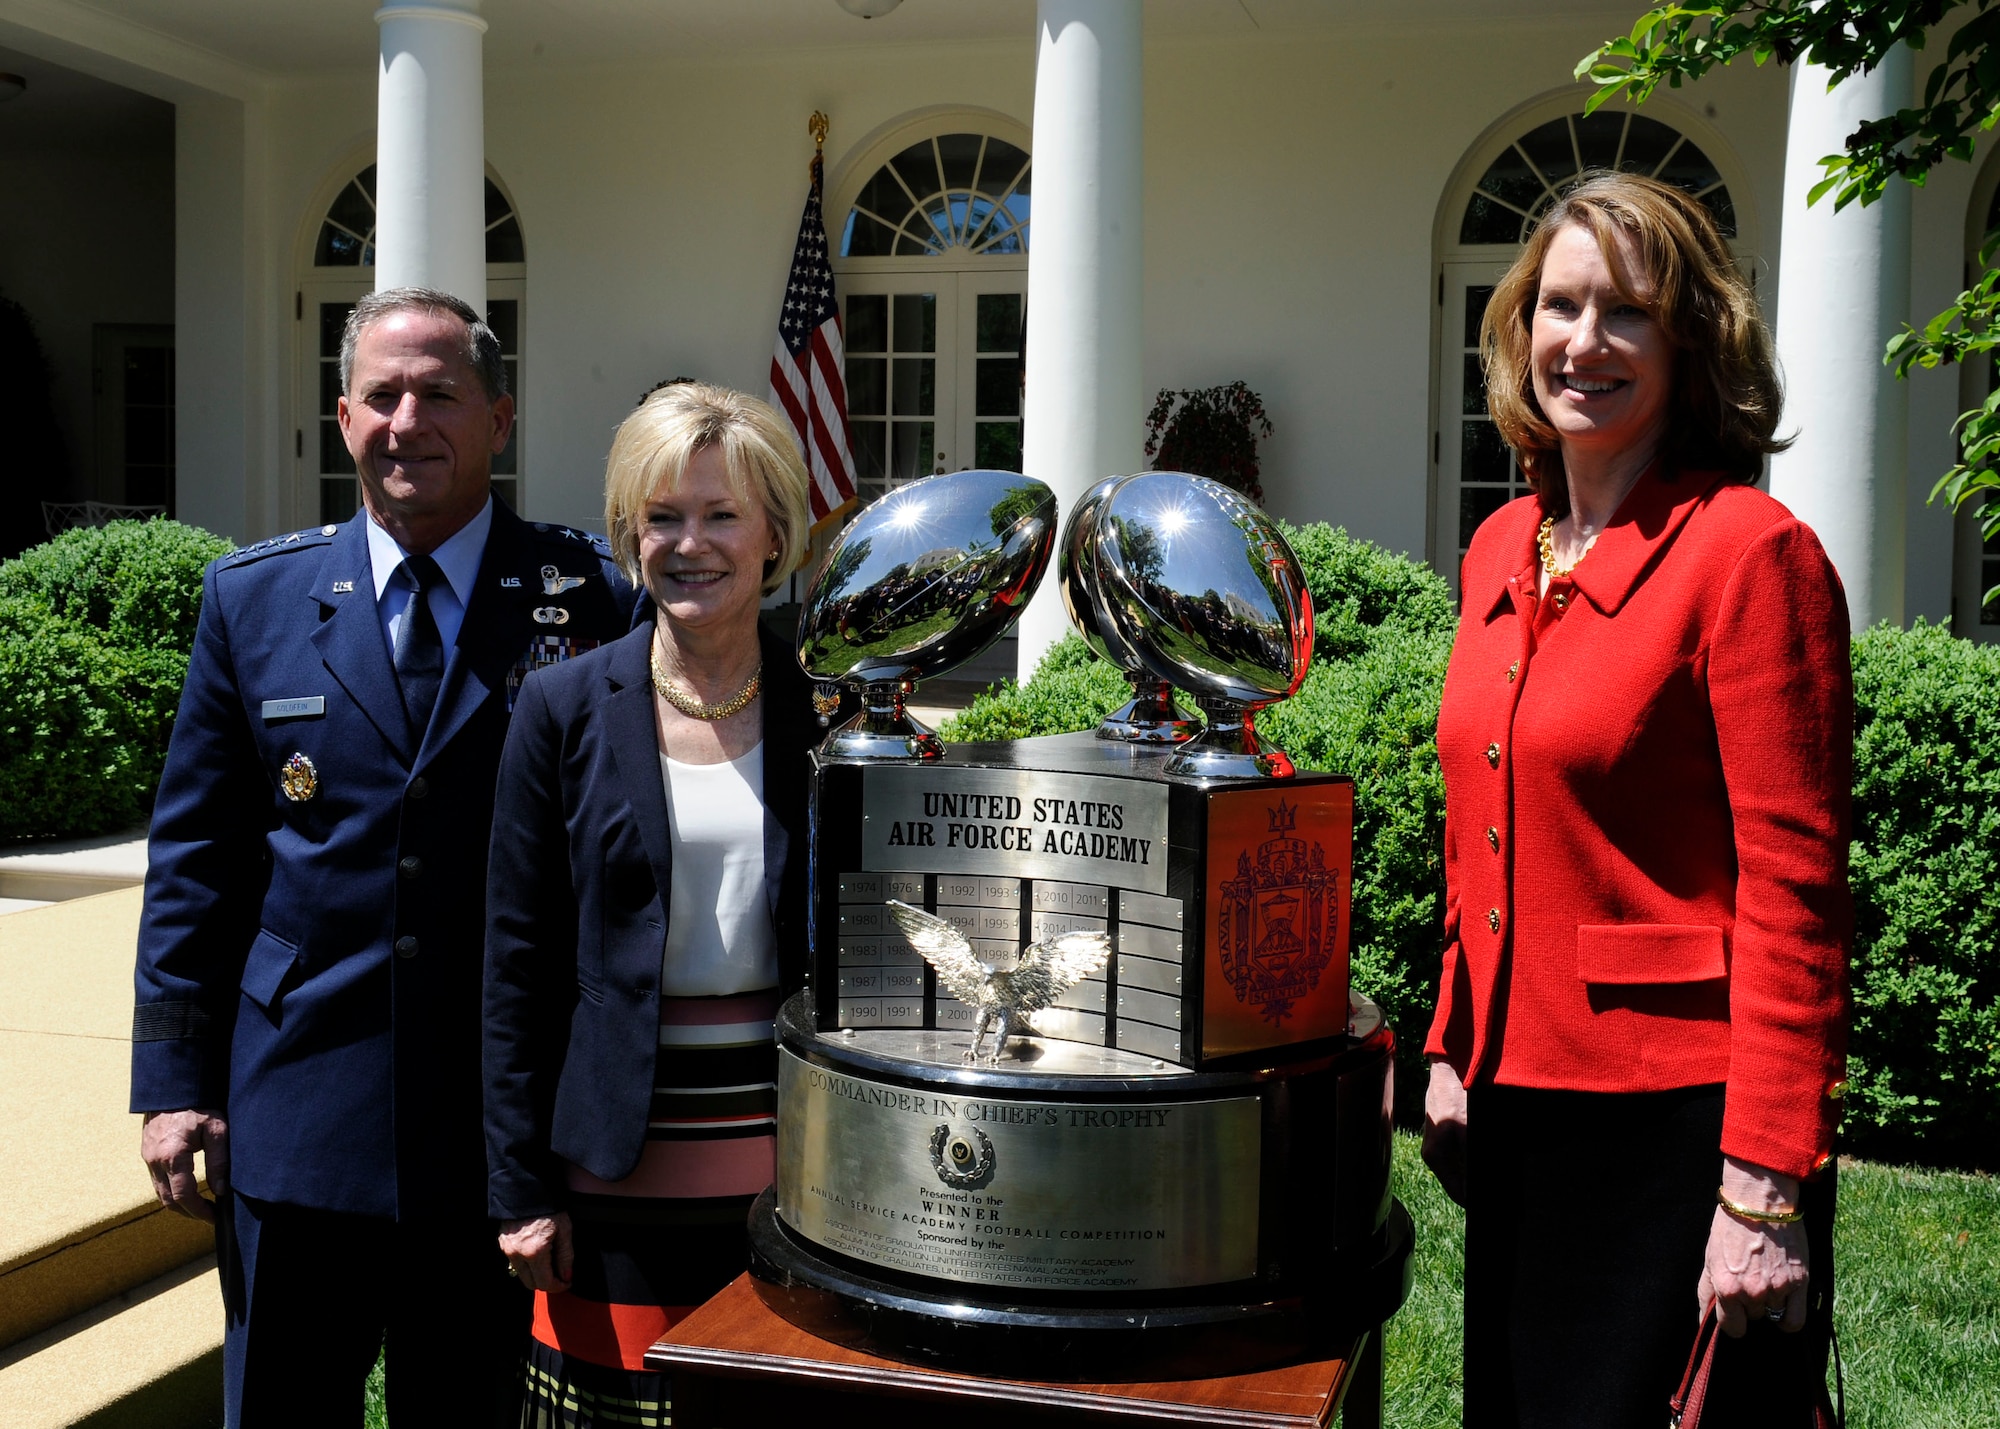 Air Force Chief of Staff Gen. David L. Goldfein, his wife, Dawn Goldfein and Acting Secretary of the Air Force Lisa S. Disbrow stand with the Commander -in -Chief's Trophy earned by the U.S. Air Force Academy at the White House, May 2, 2017. The Academy has earned the trophy 20 times. (U.S. Air Force photo/Staff Sgt. Jannelle McRae)